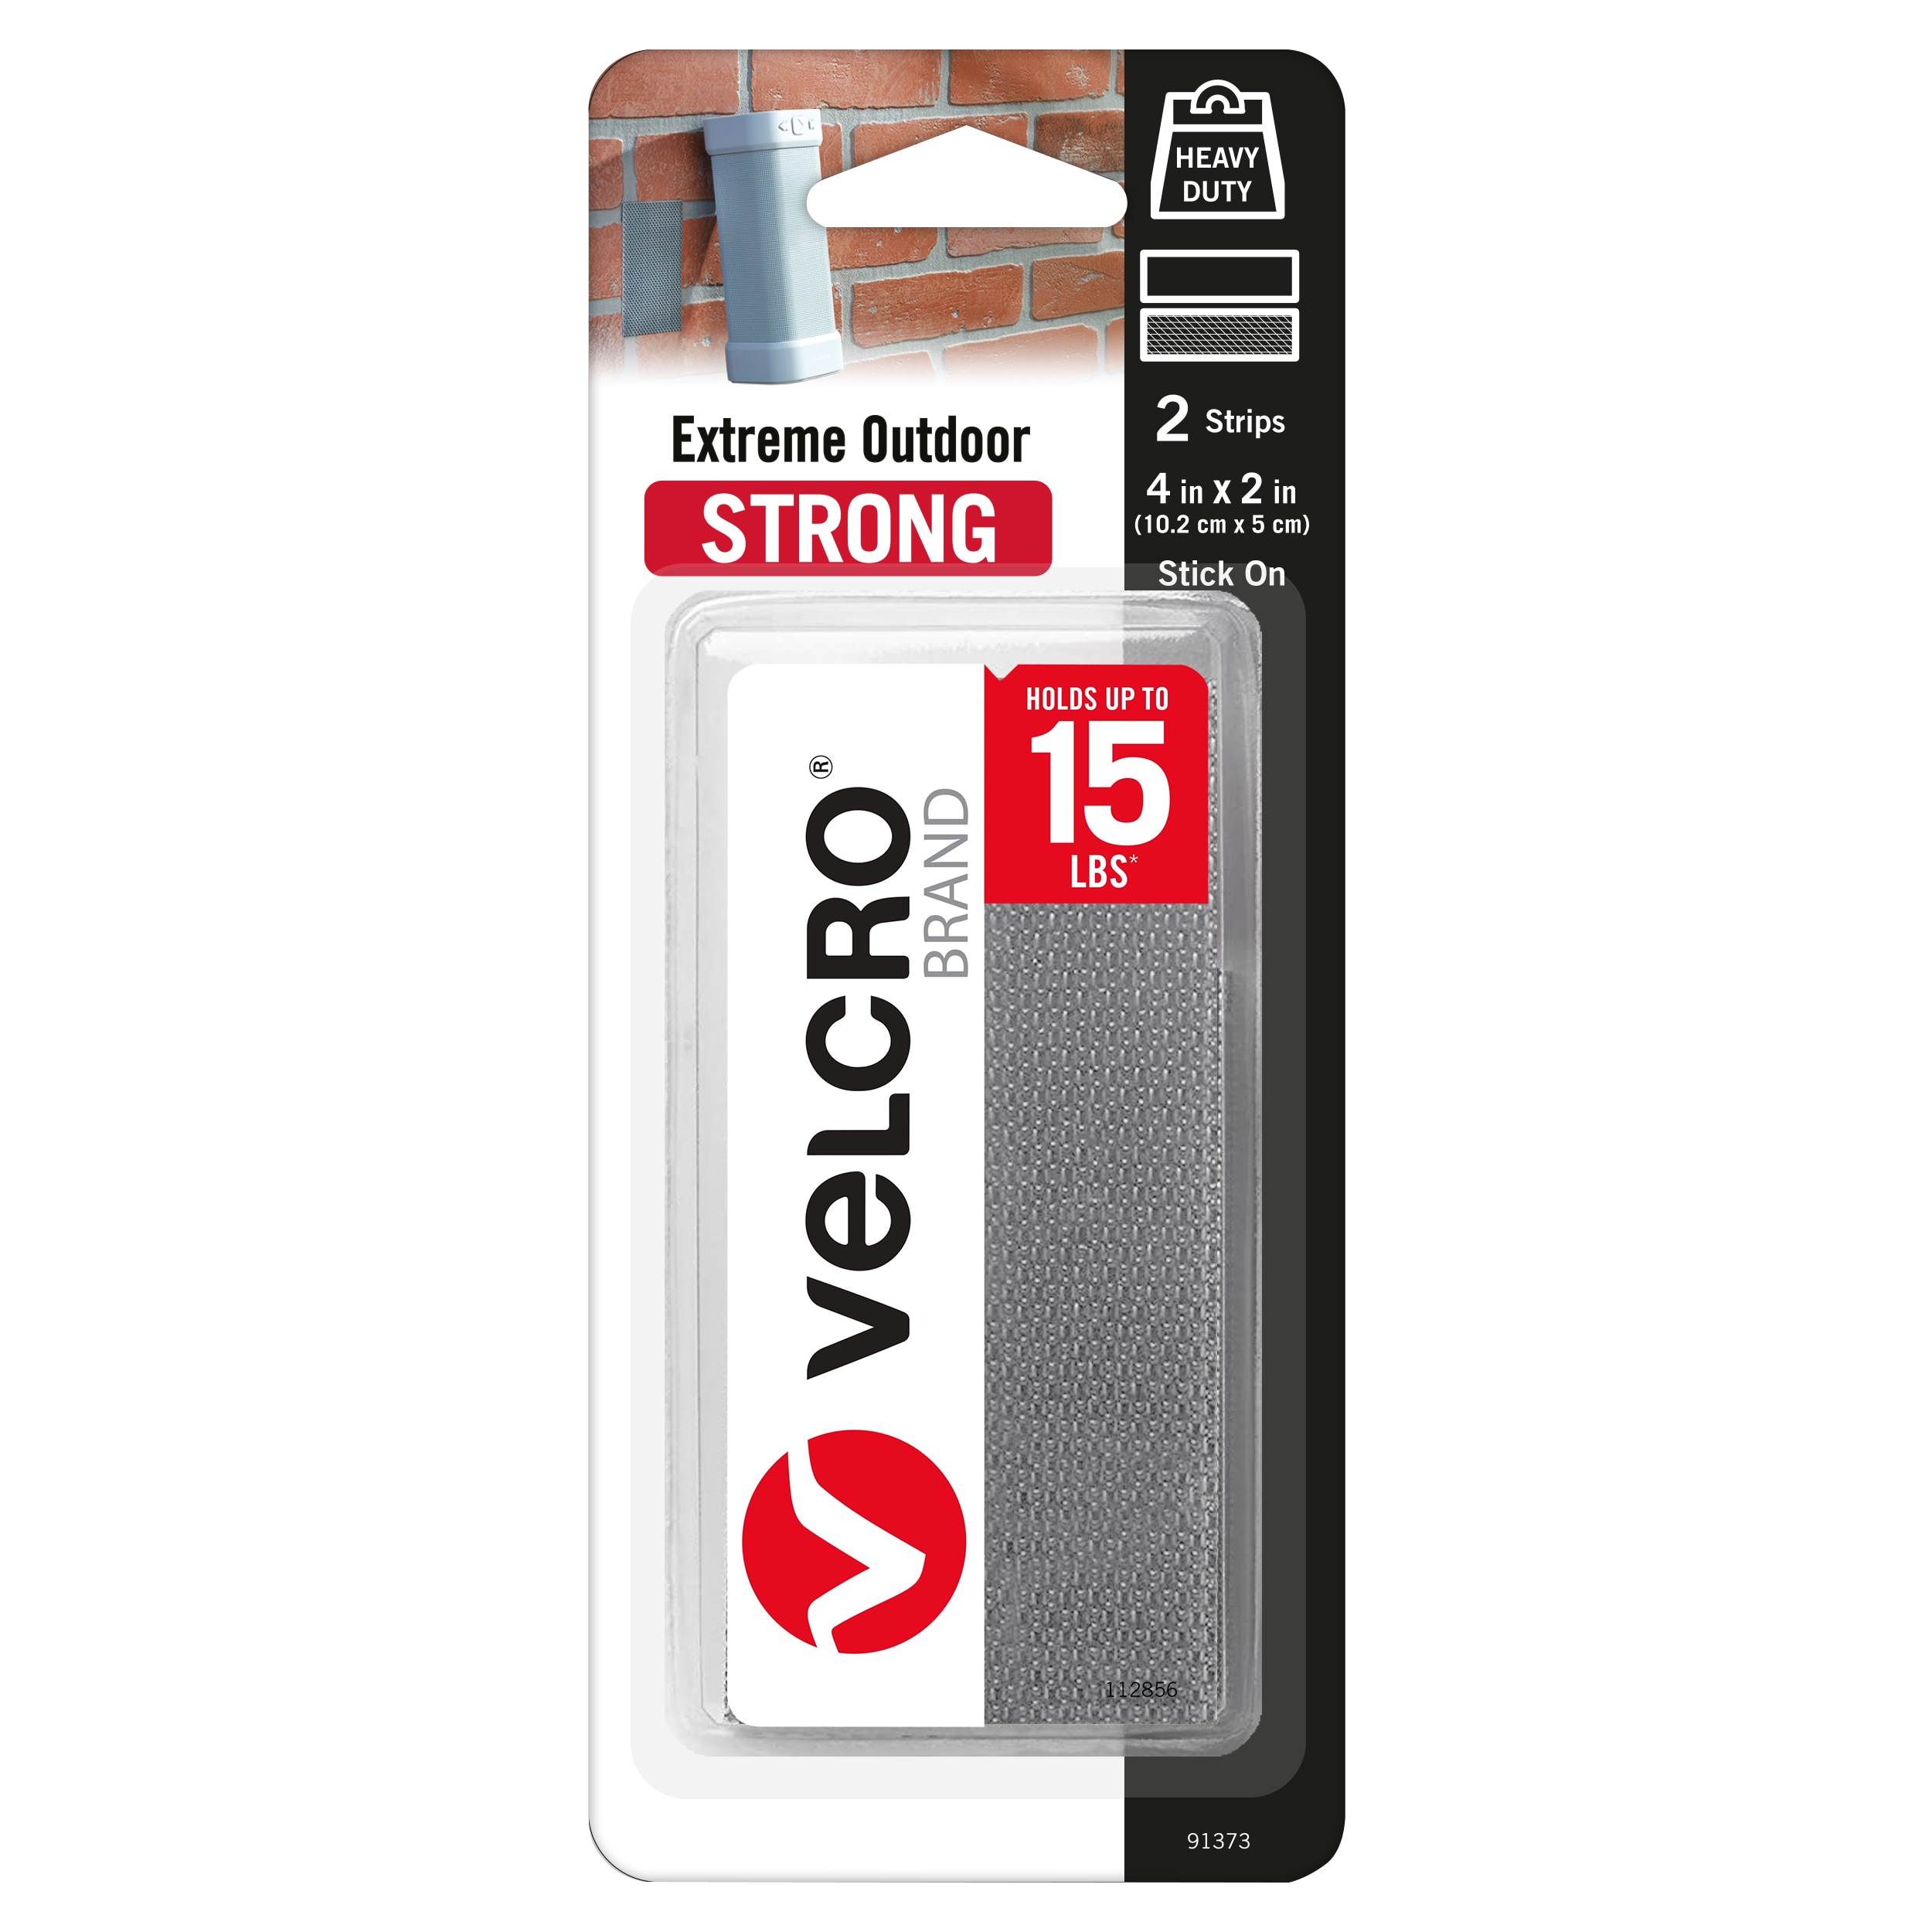  VELCRO Brand Industrial Fasteners Stick-On Adhesive, Professional Grade Heavy Duty Strength Holds up to 10 lbs on Smooth  Surfaces